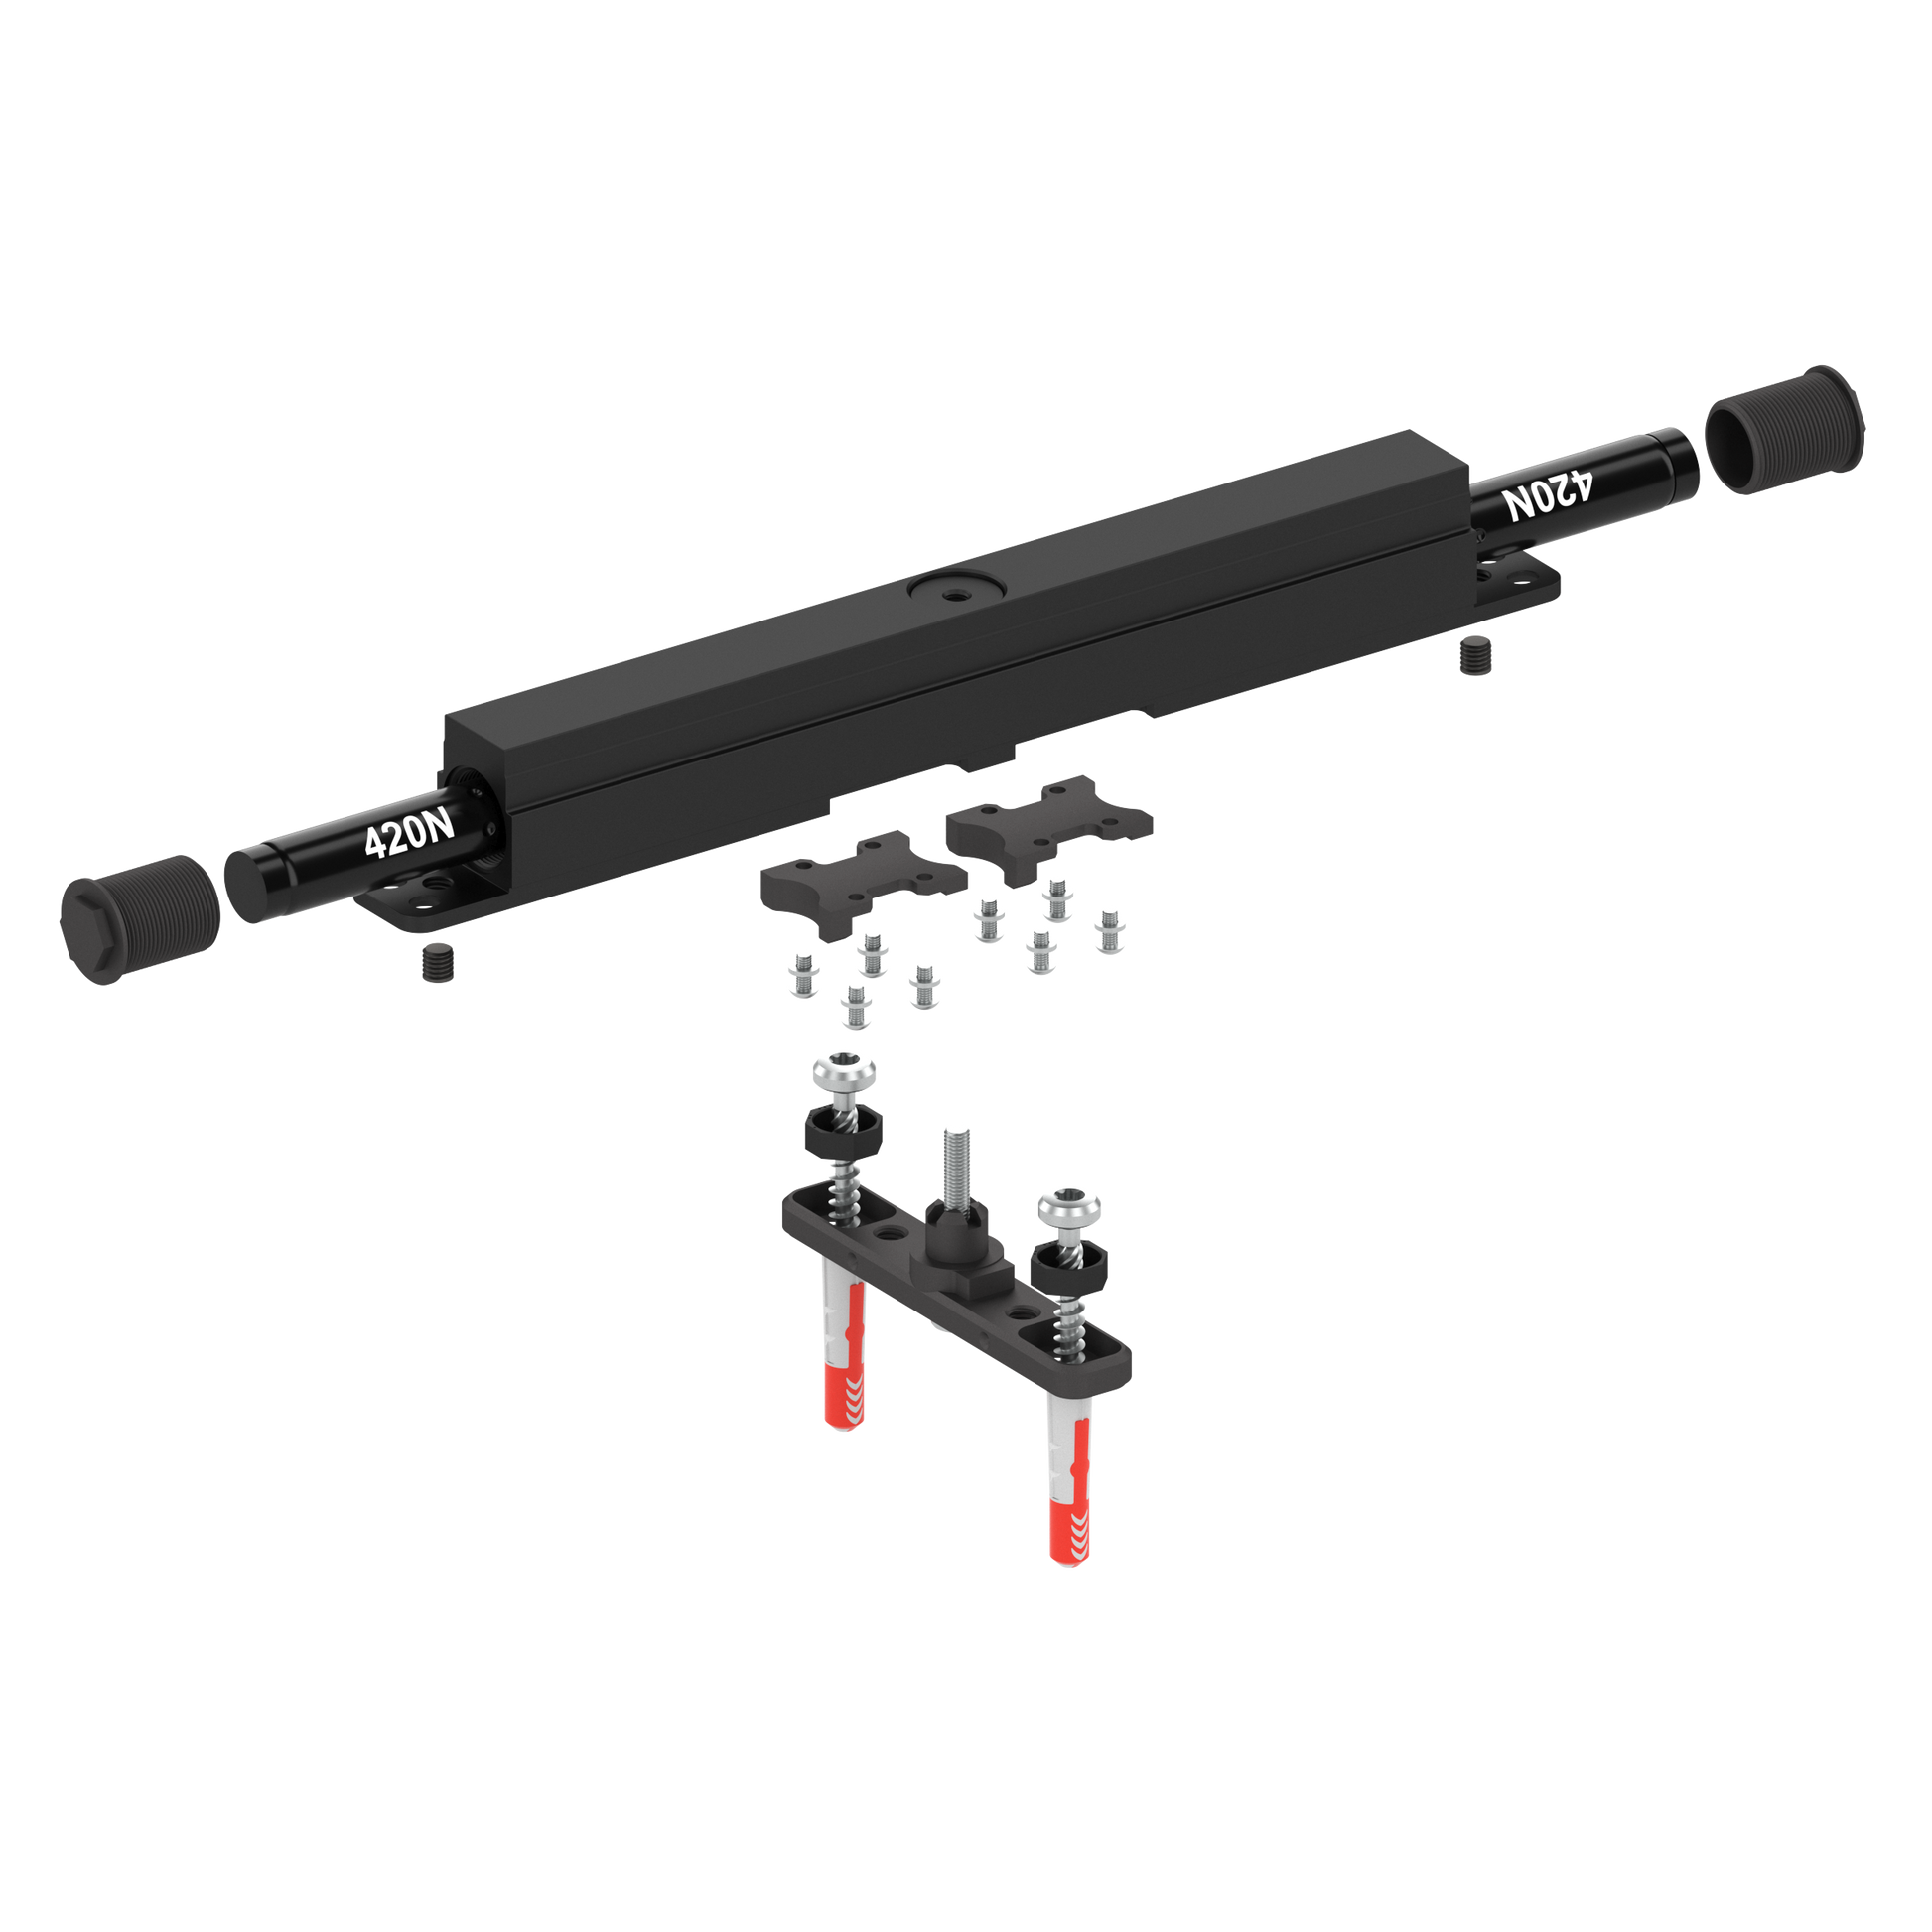 Stealthpivot XL exploded view